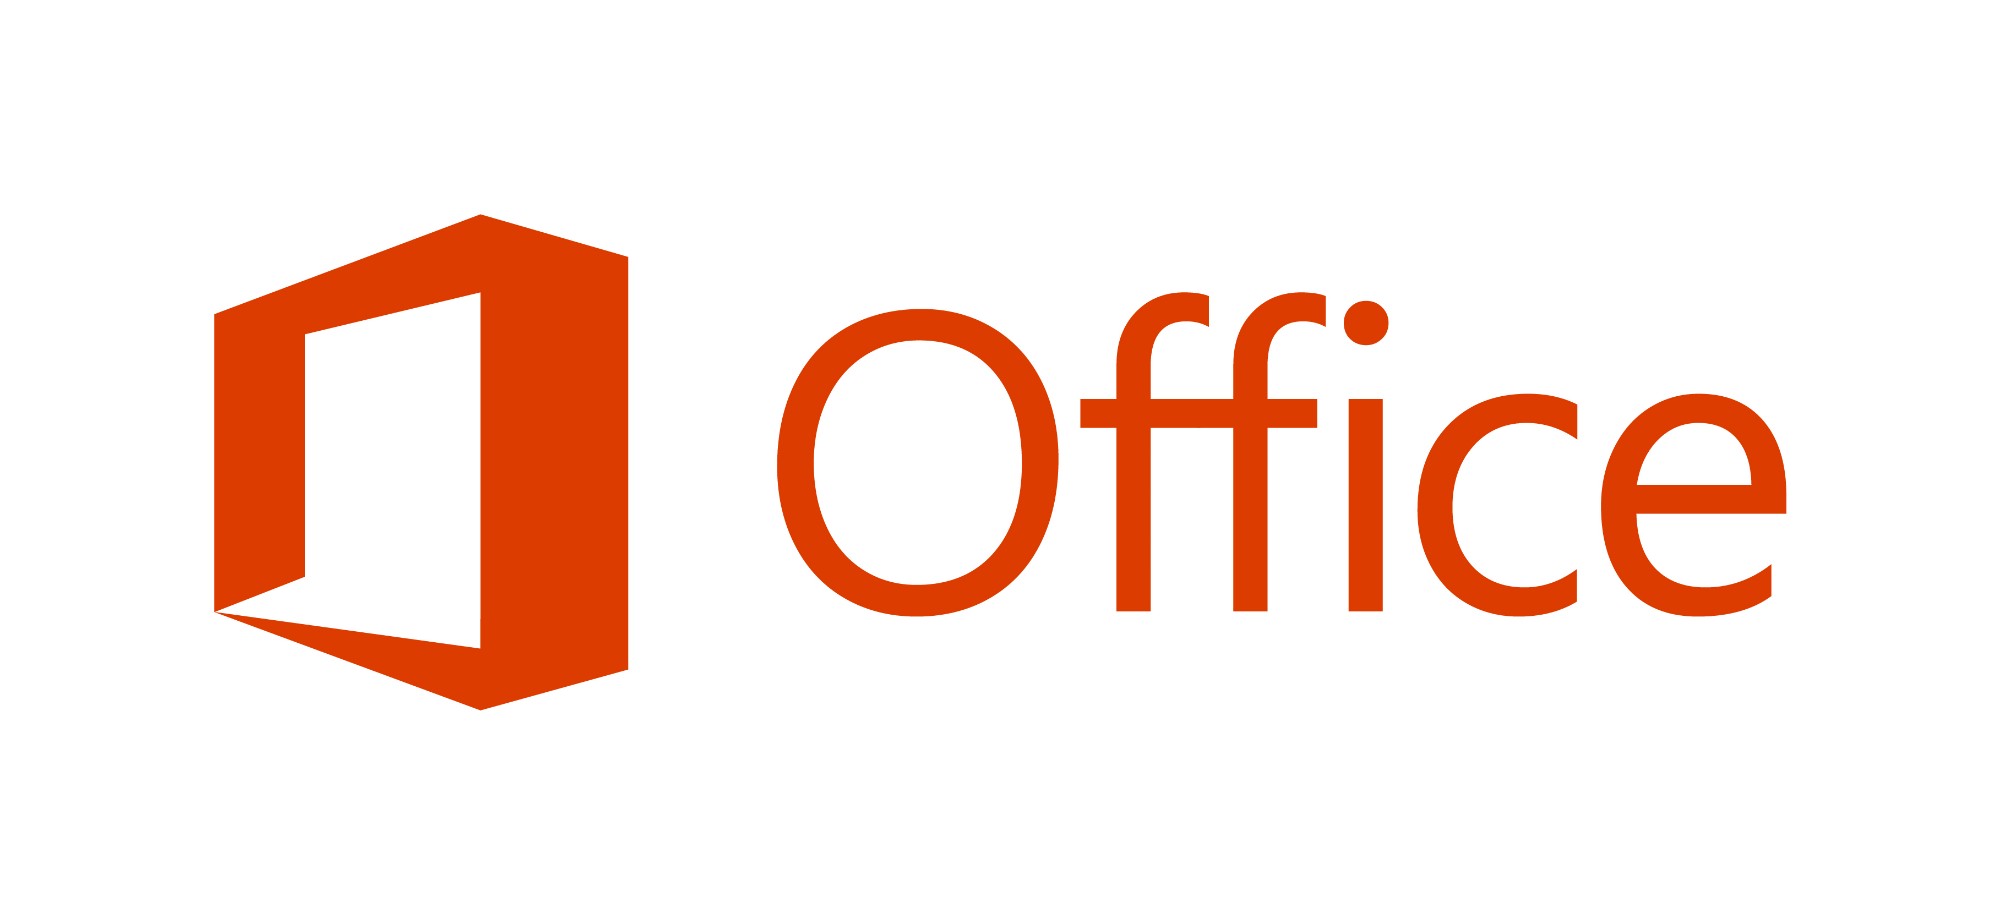 Microsoft Office Home & Business 2021 - Multilingual